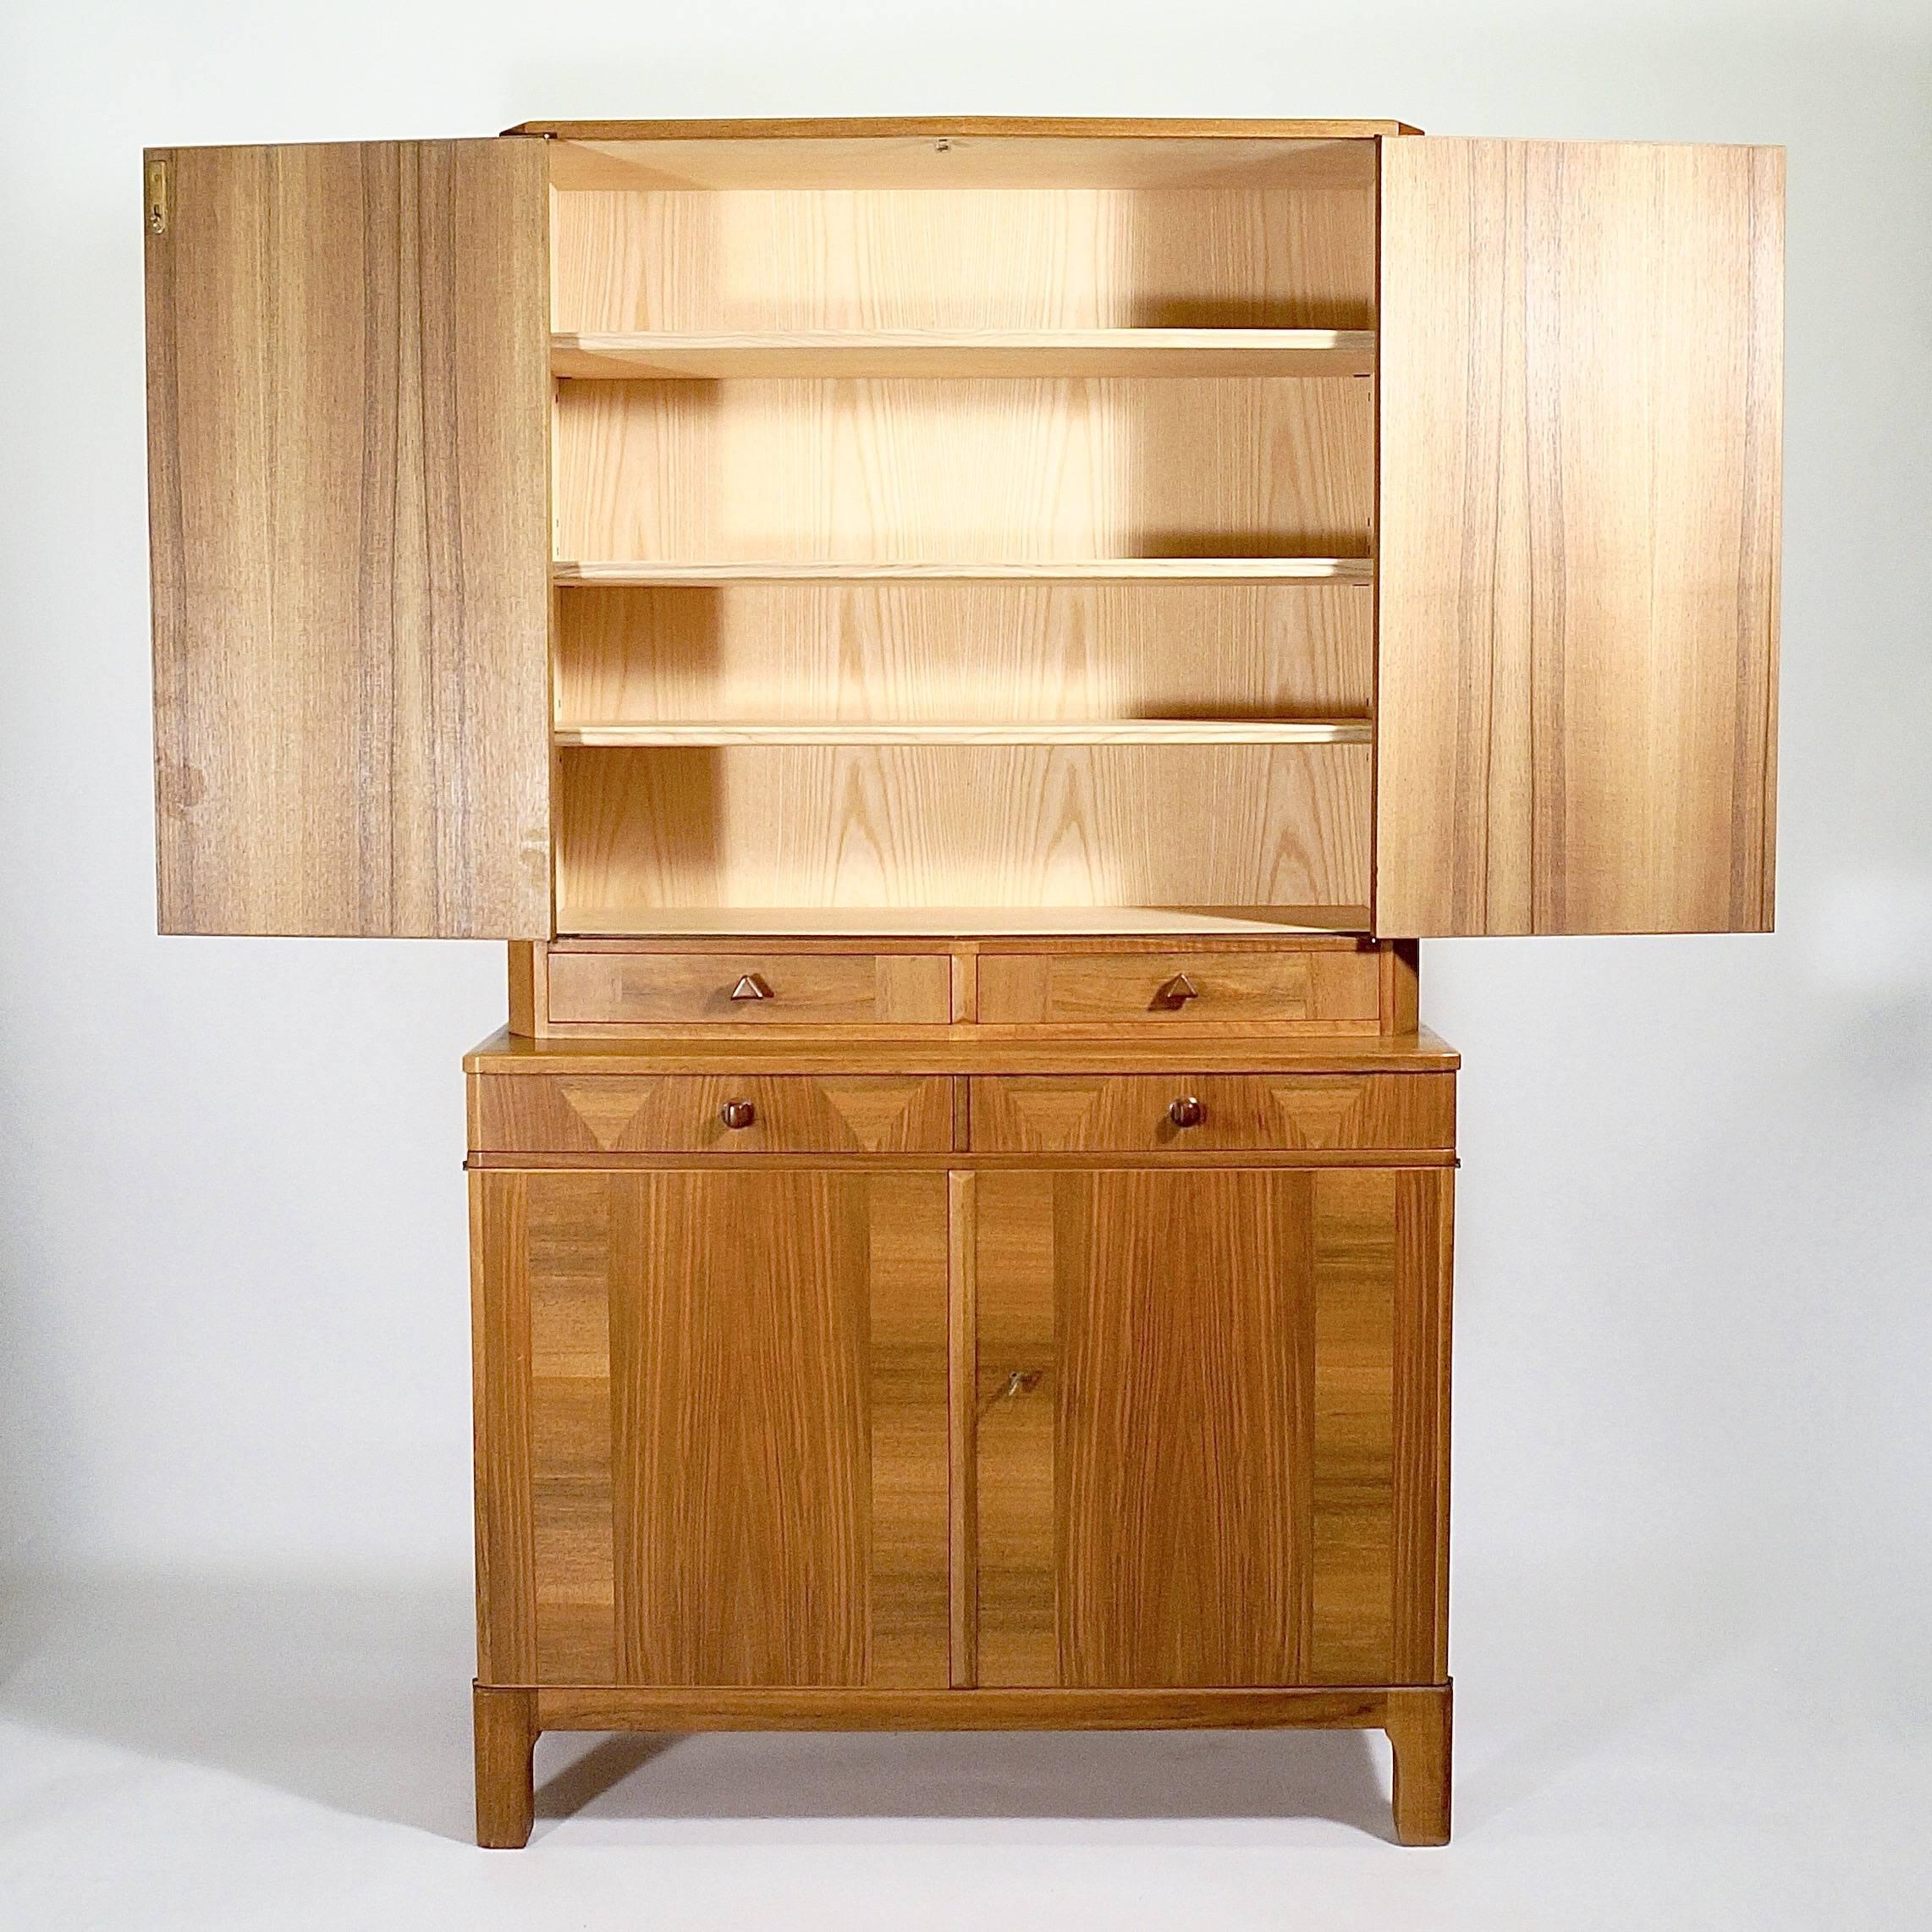 A walnut parquetry veneered cabinet in two parts. The upper section with two slightly canted doors above two conforming drawers, the lower section with two drawers above two doors. Both sections with shelved interiors.

Designed for Afors